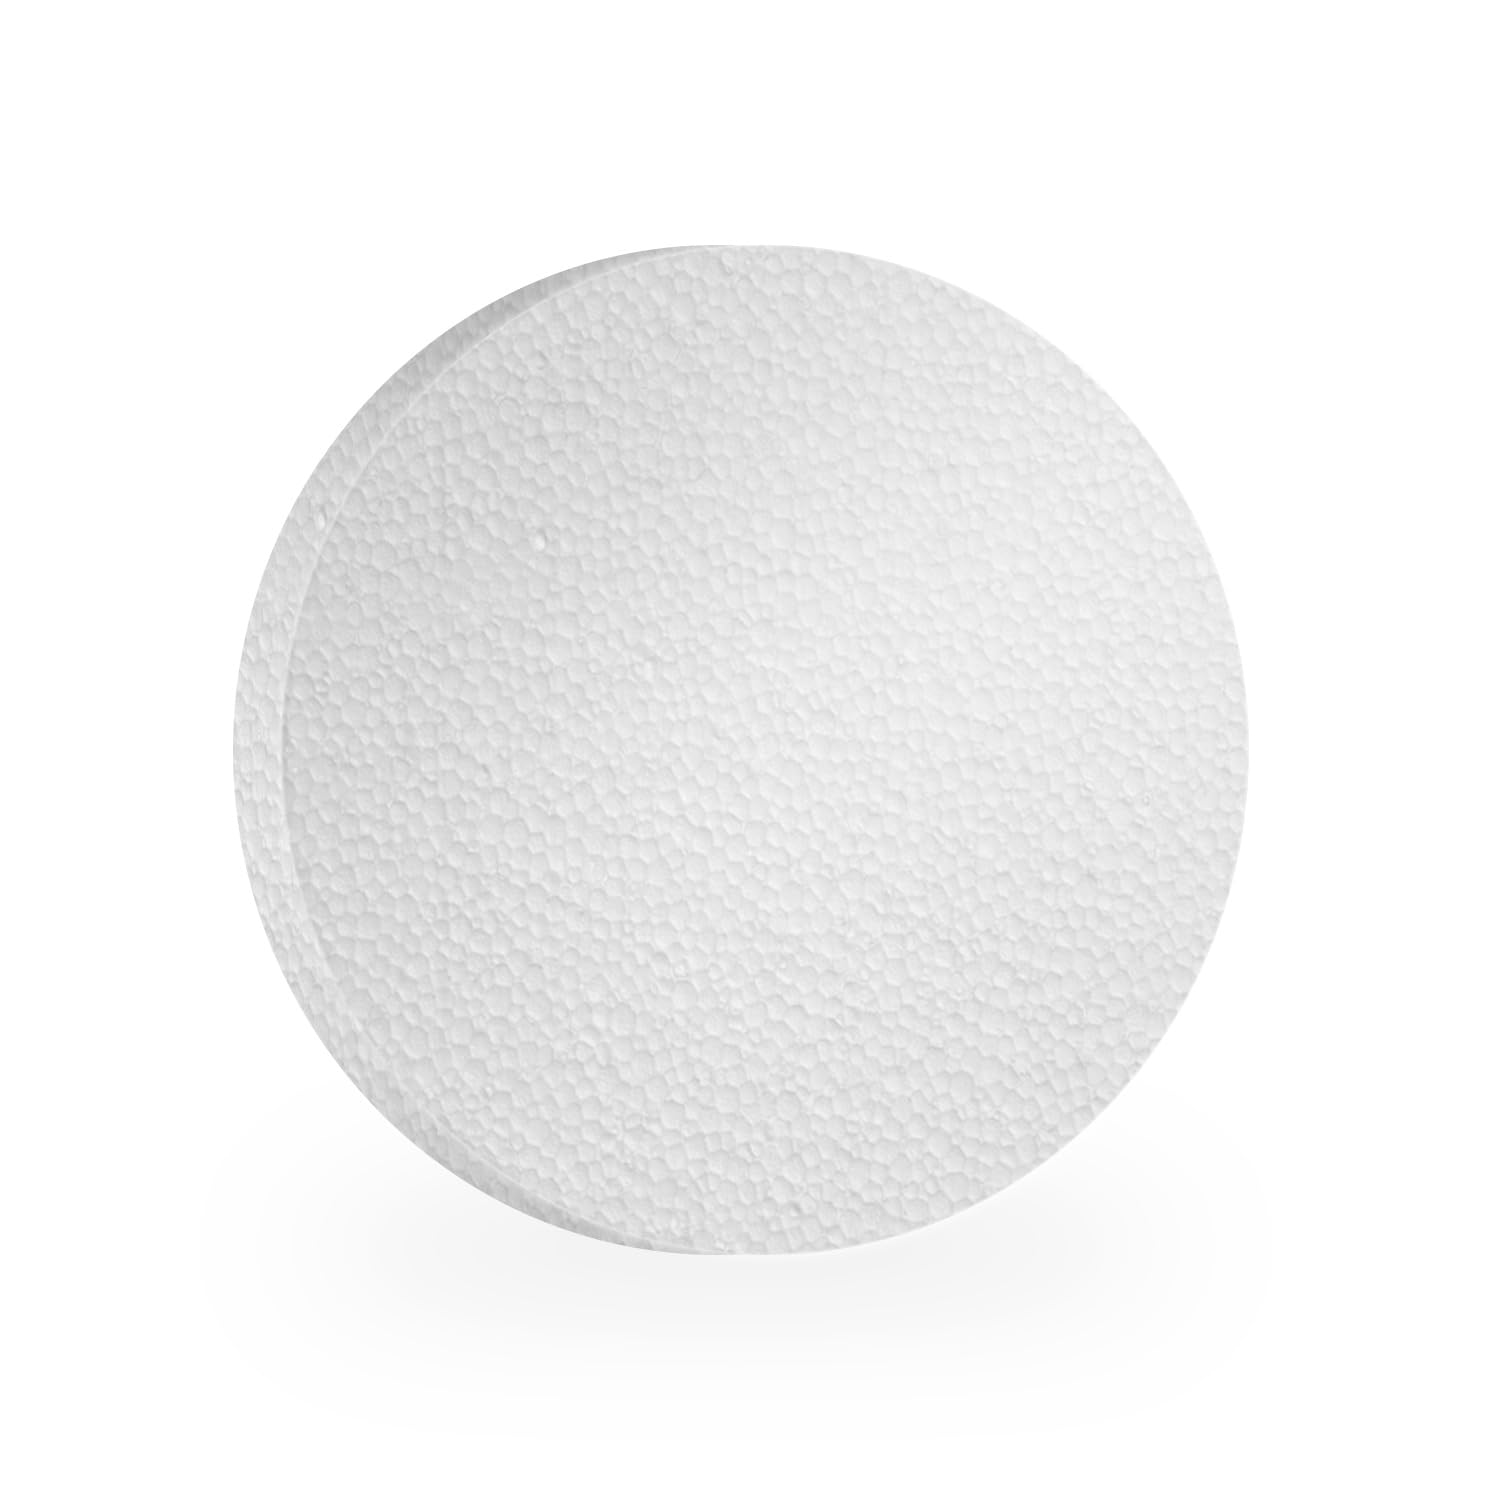  14 Pack 8x8 (1 Thick) Round Foam Circles for Crafts, EPS Foam  Circle for DIY Projects, Round Polystyrene Craft Foam Disc White : Arts,  Crafts & Sewing